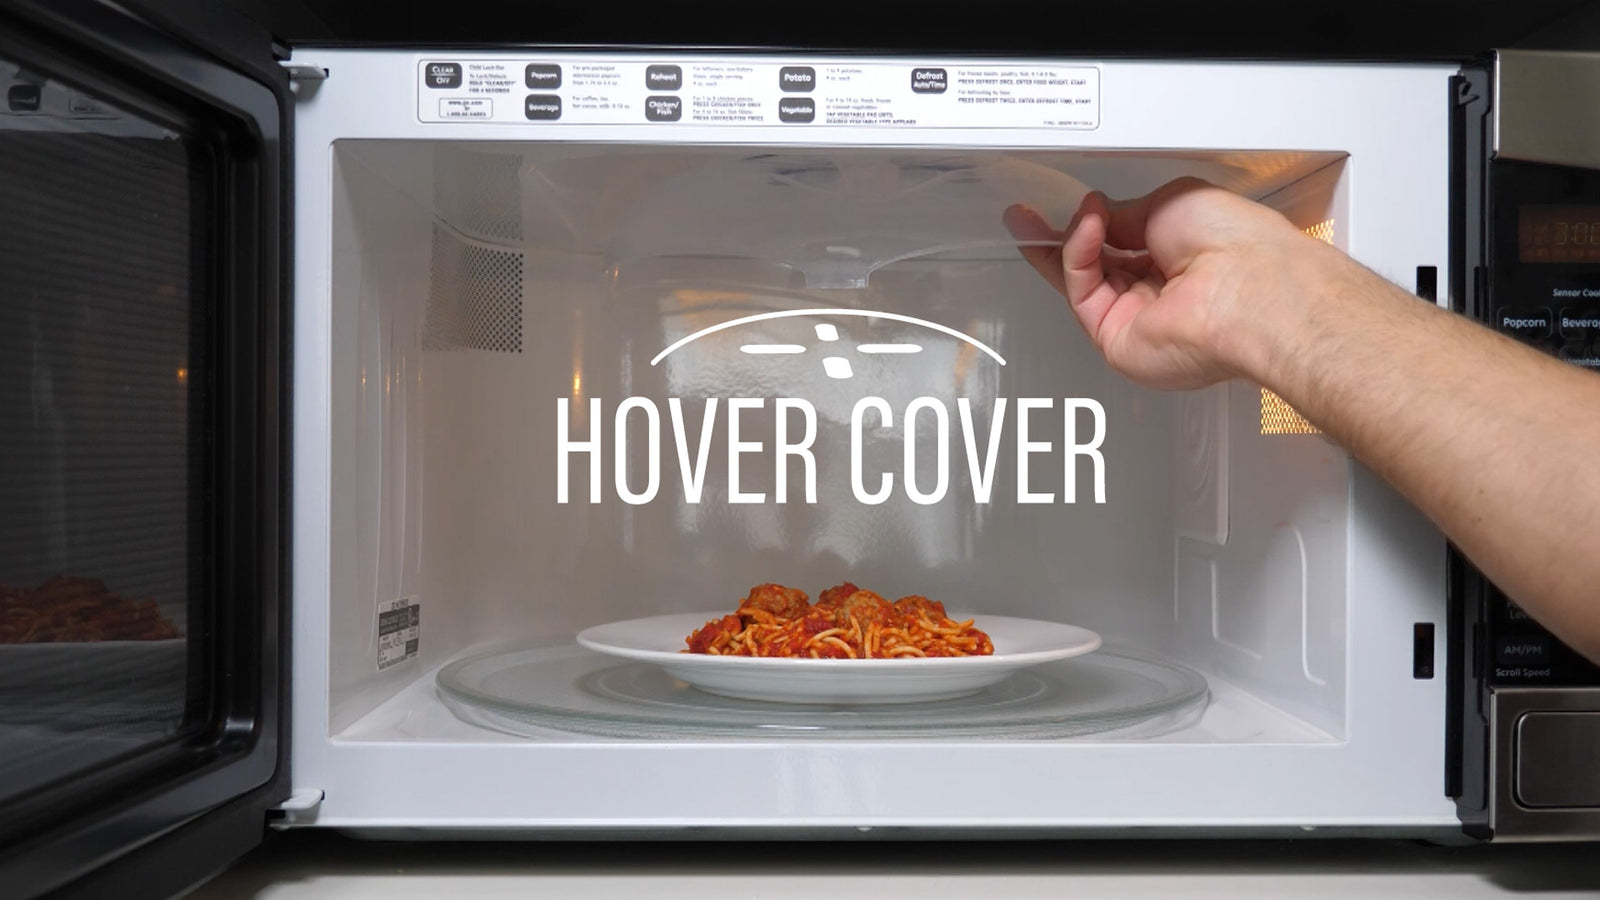 magnetic microwave cover｜TikTok Search